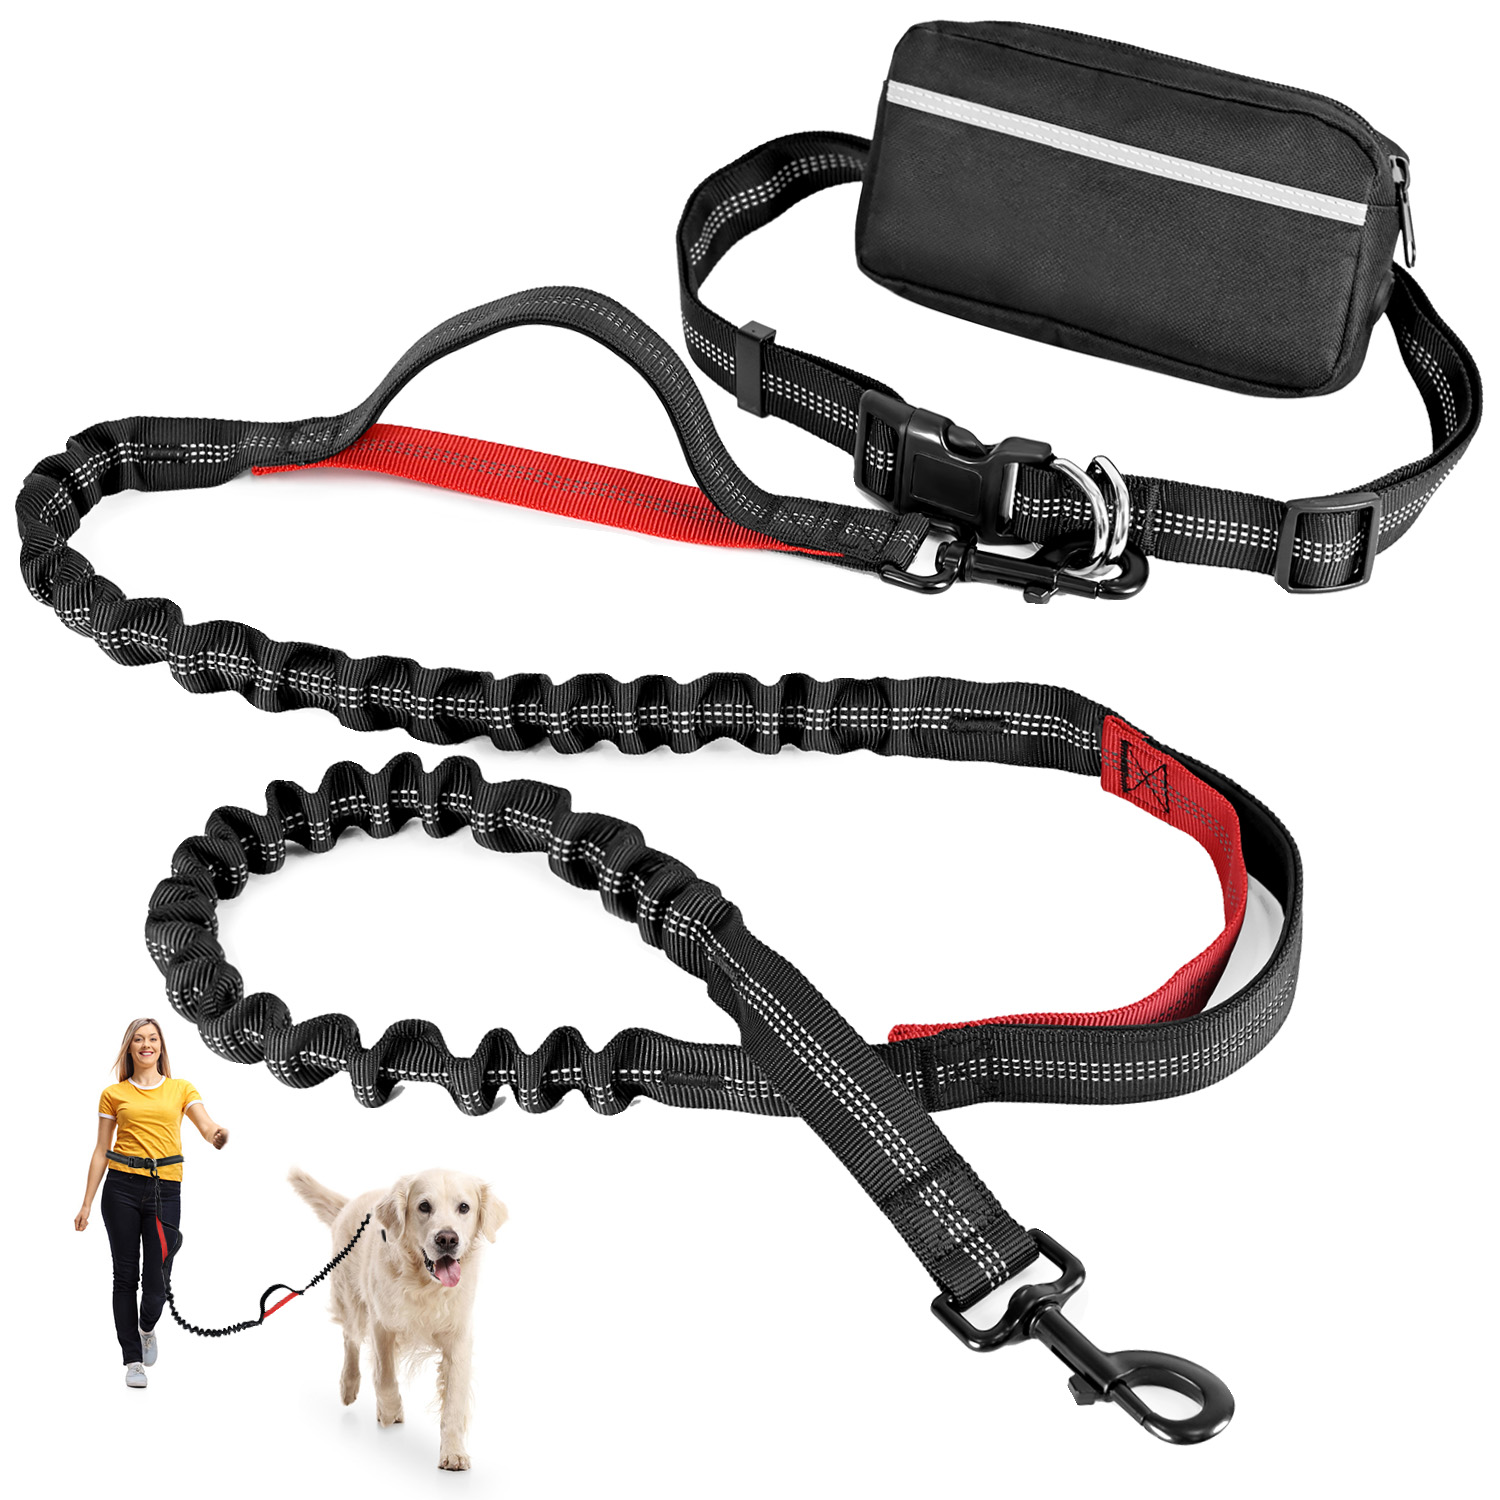 

Hands Free Dog Leash With Zipper Pouch, Petstars Dual Padded Handles And Duarable Bungee Adjustable Waist Belt (27" - 49") Up To 120 Lbs, Suit For Medium To Large Dogs Walking, Jogging And Running